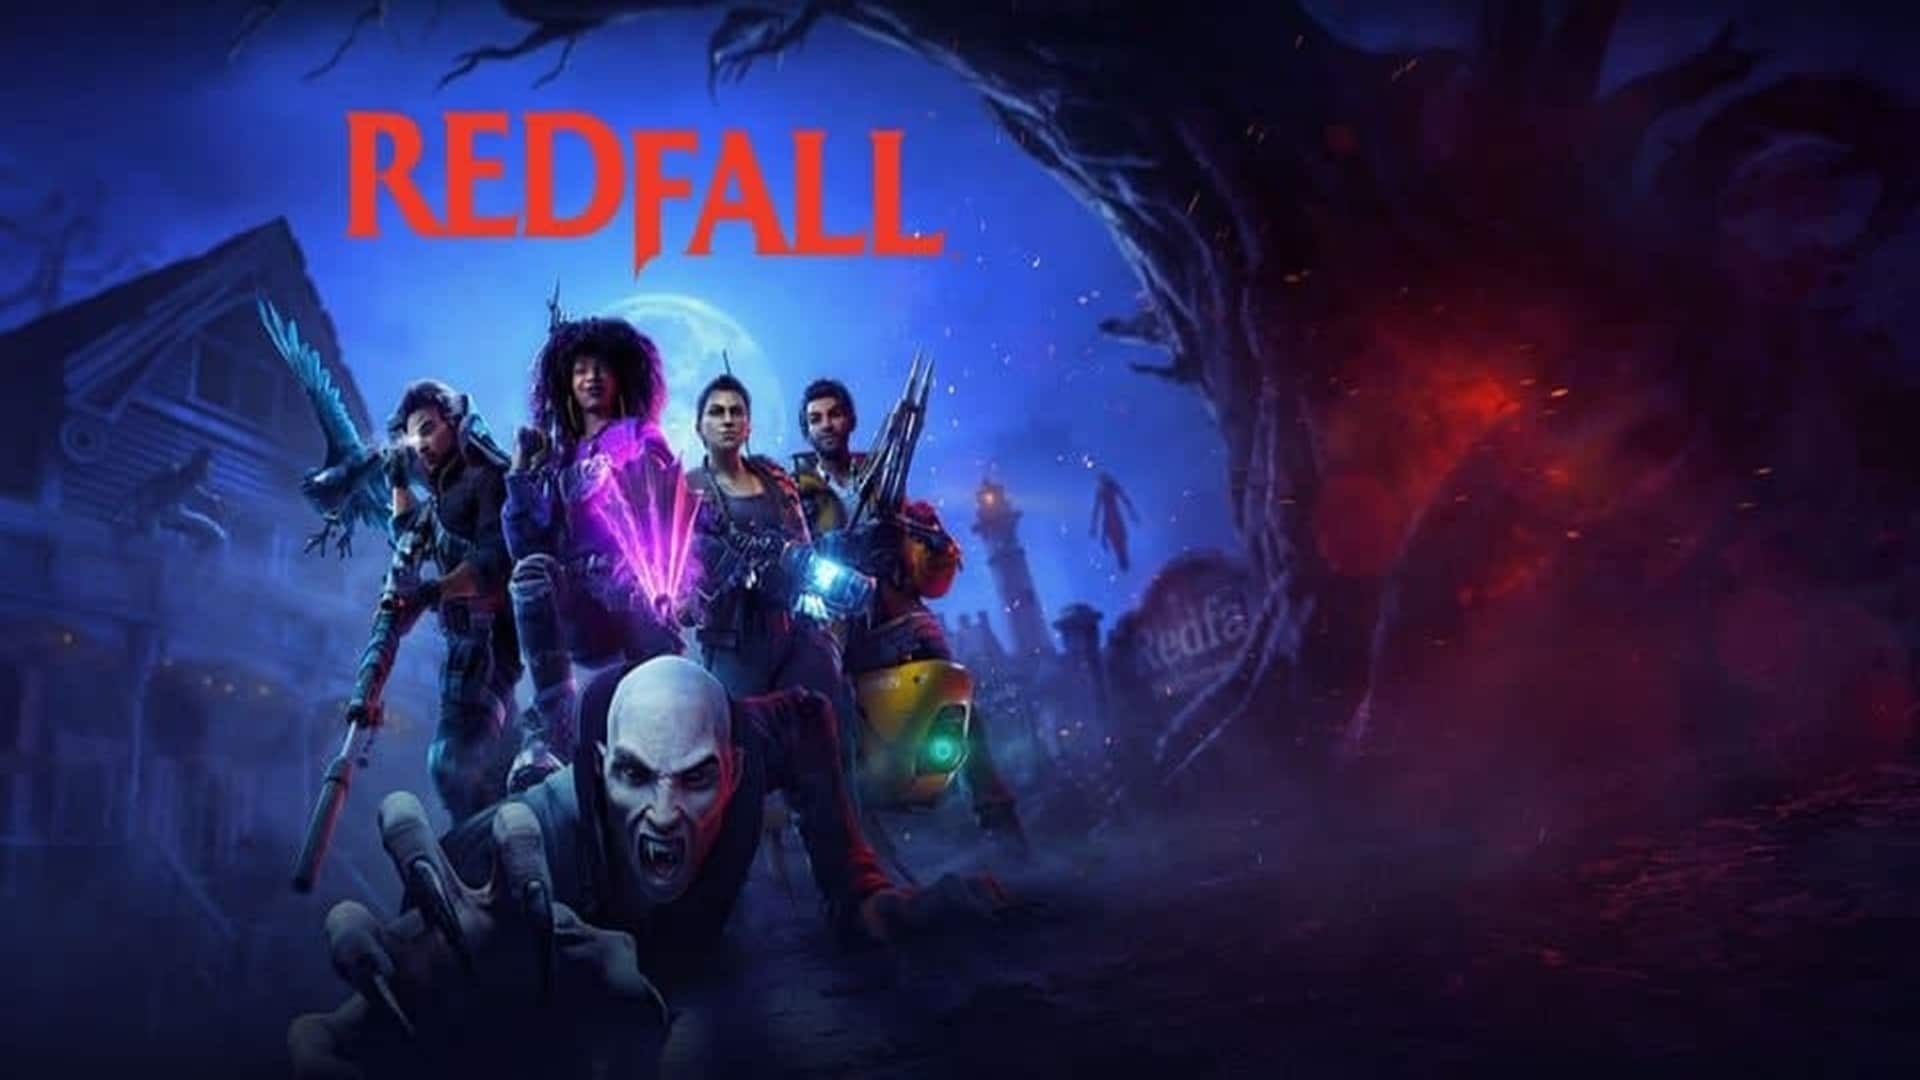 Redfall the Xbox exclusive could be delayed, according to rumor, GamersRD